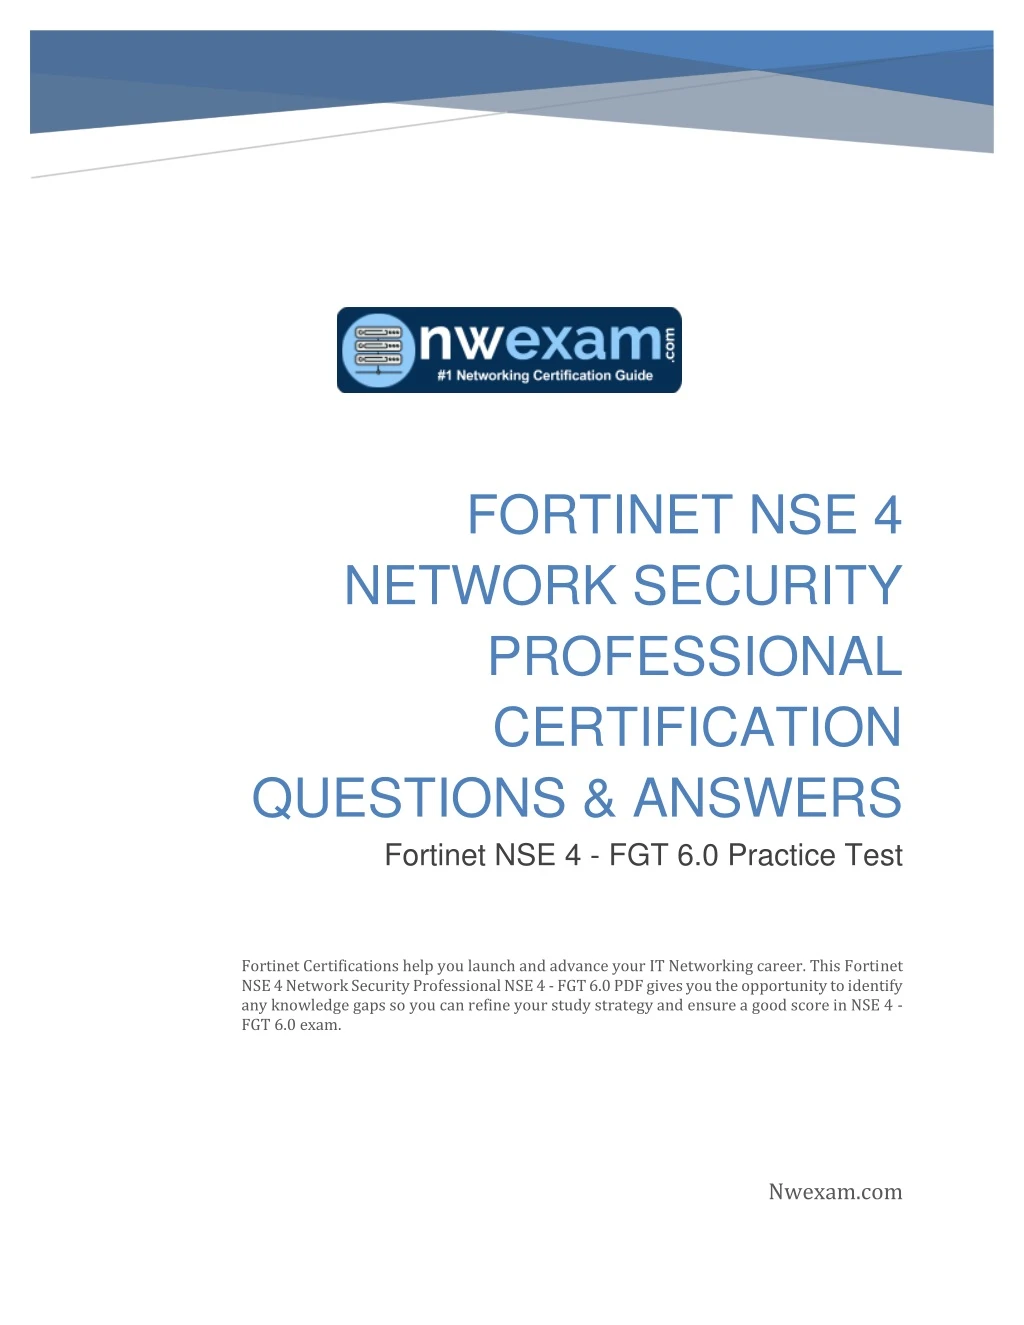 fortinet nse 4 network security professional